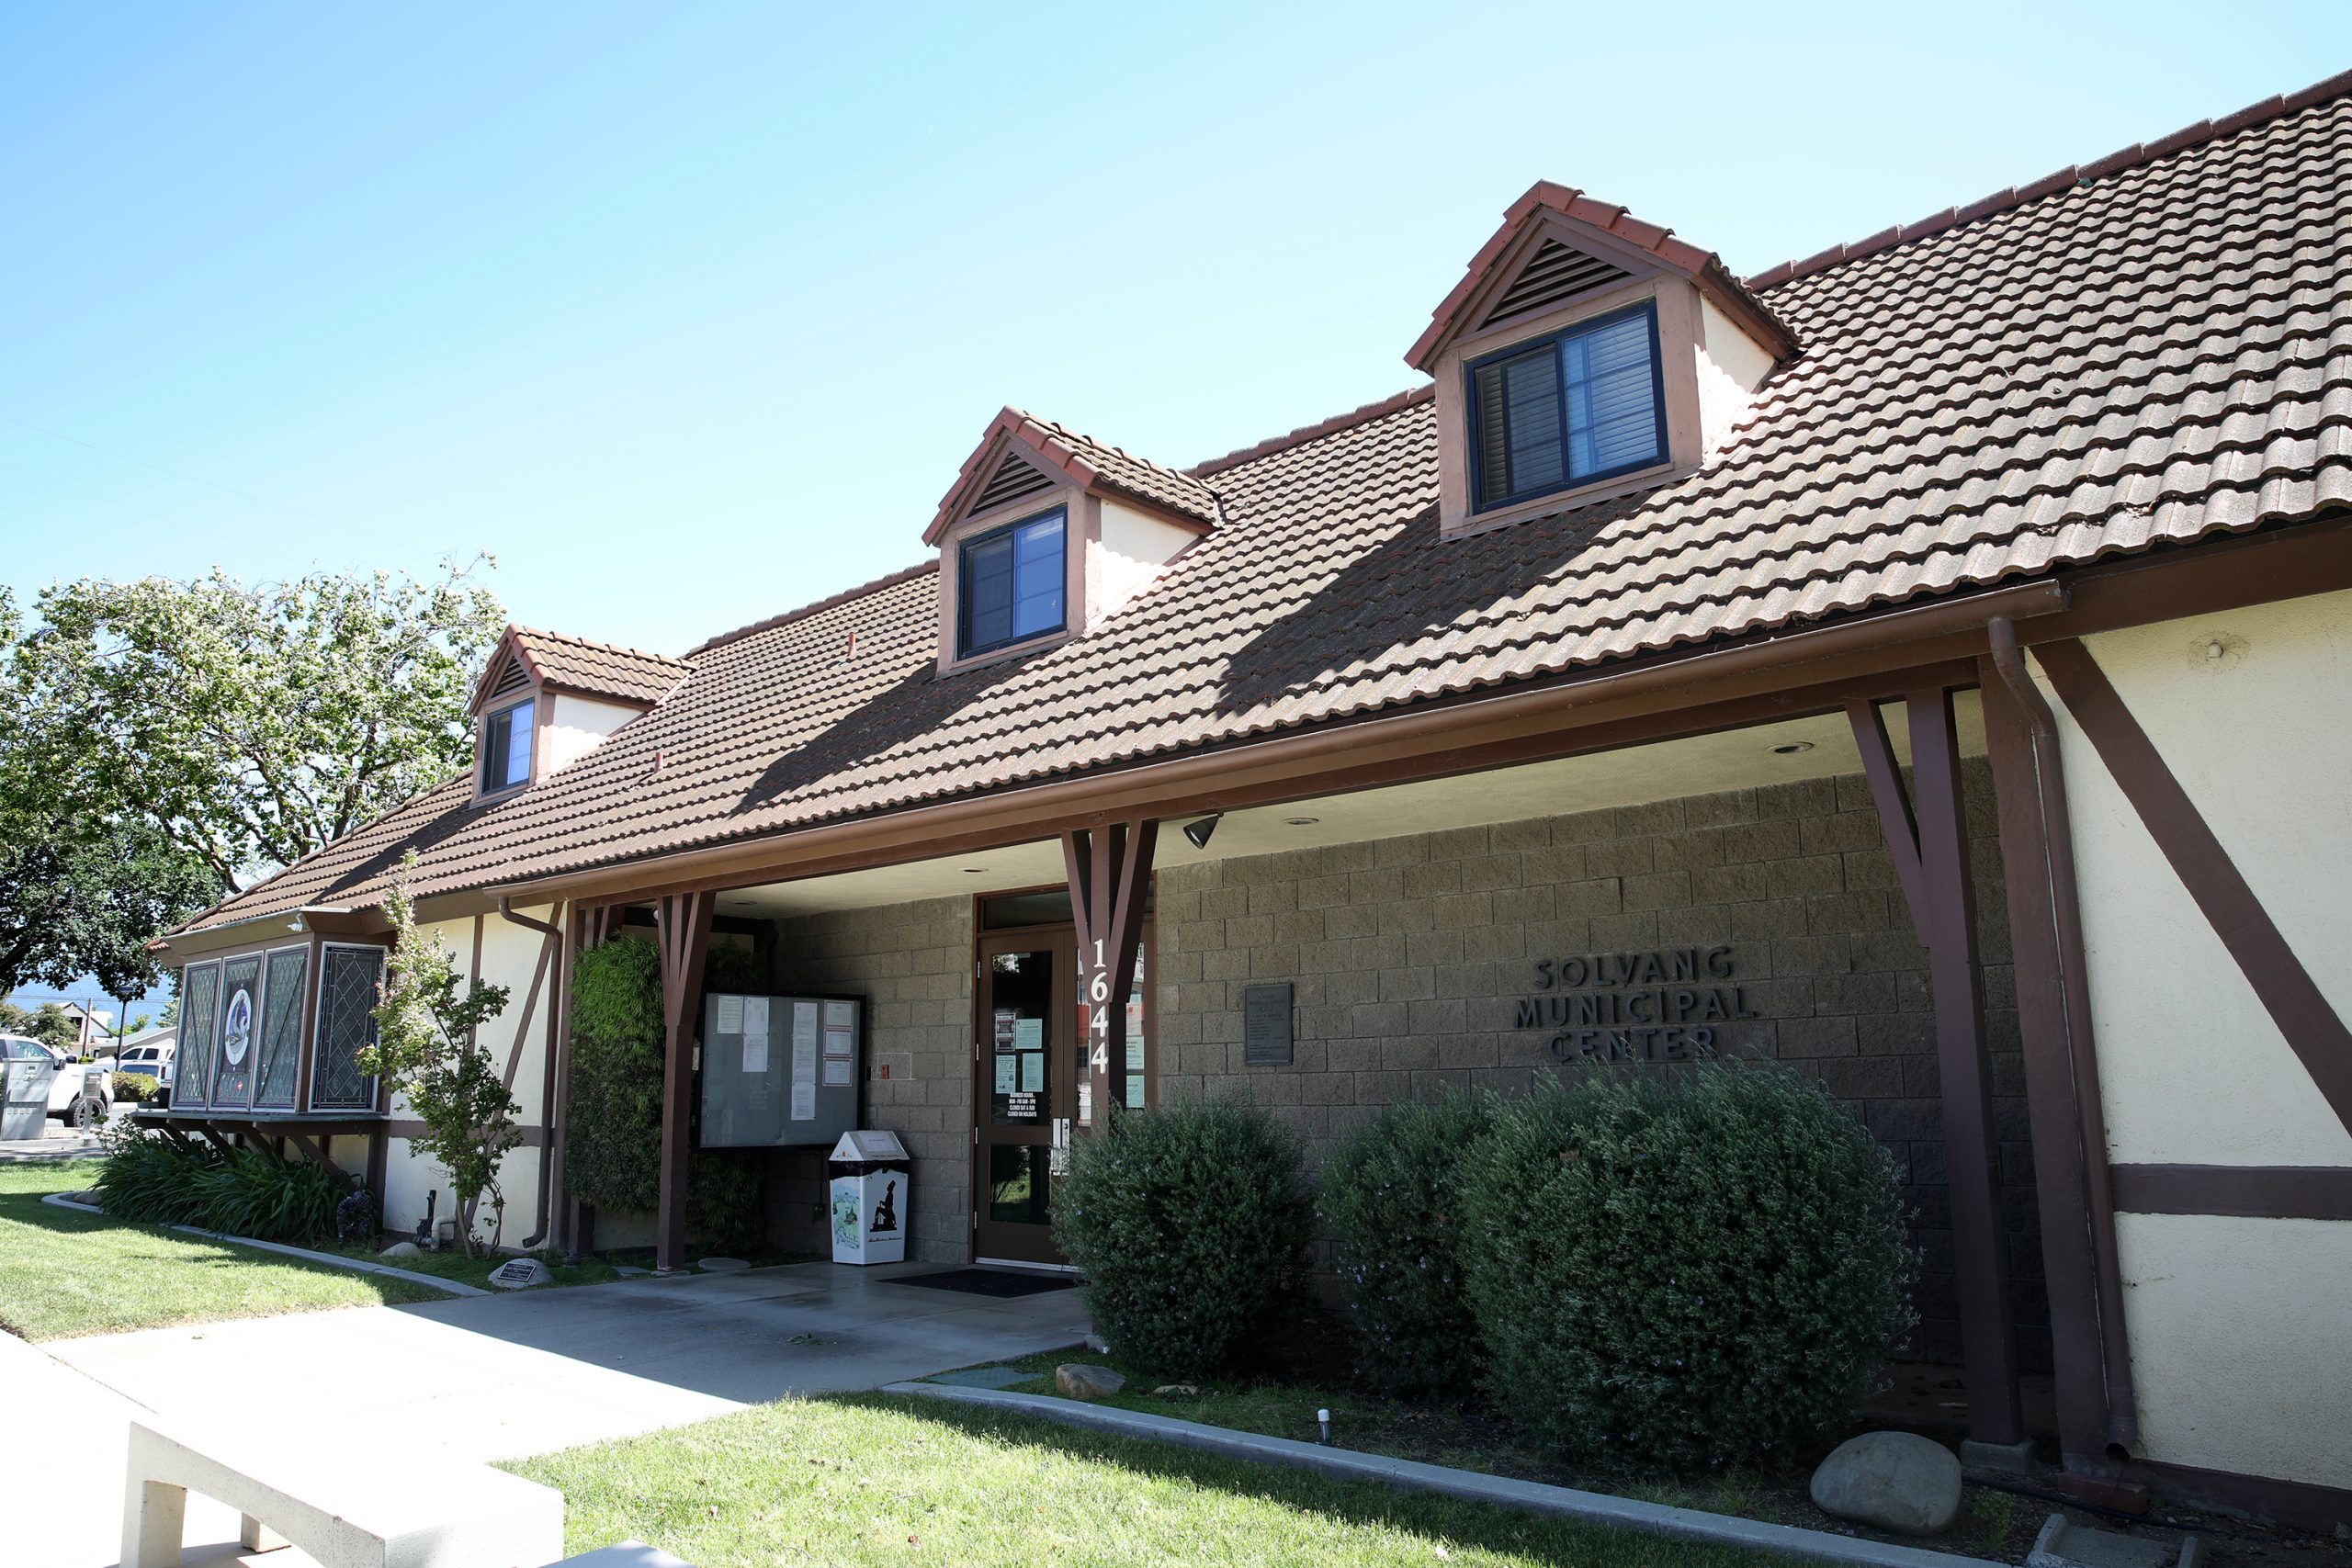 Solvang in process of a comprehensive update to General Plan